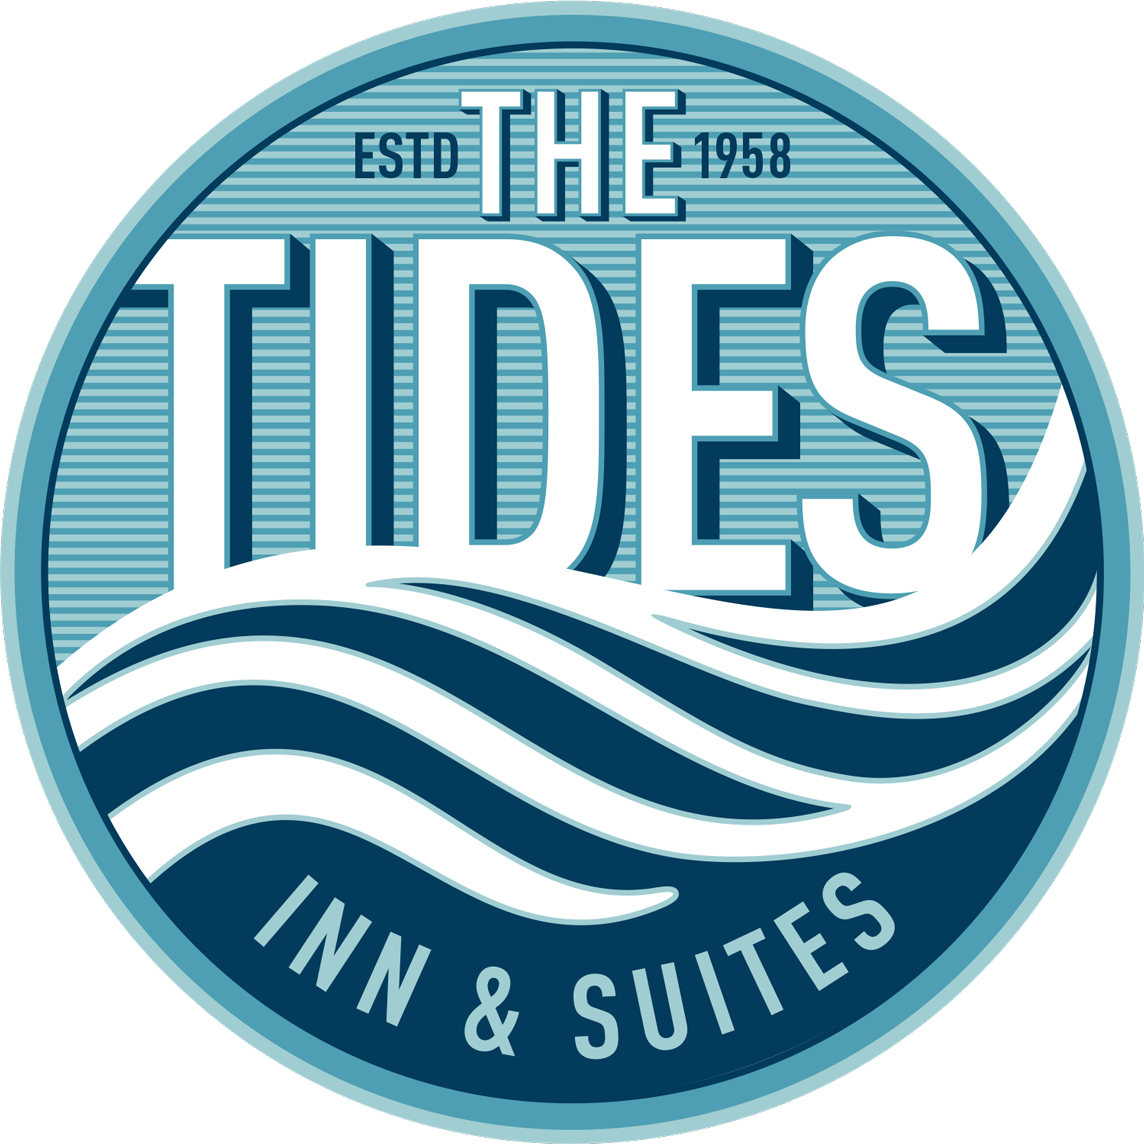 Welcome to Tides Inn & Suites